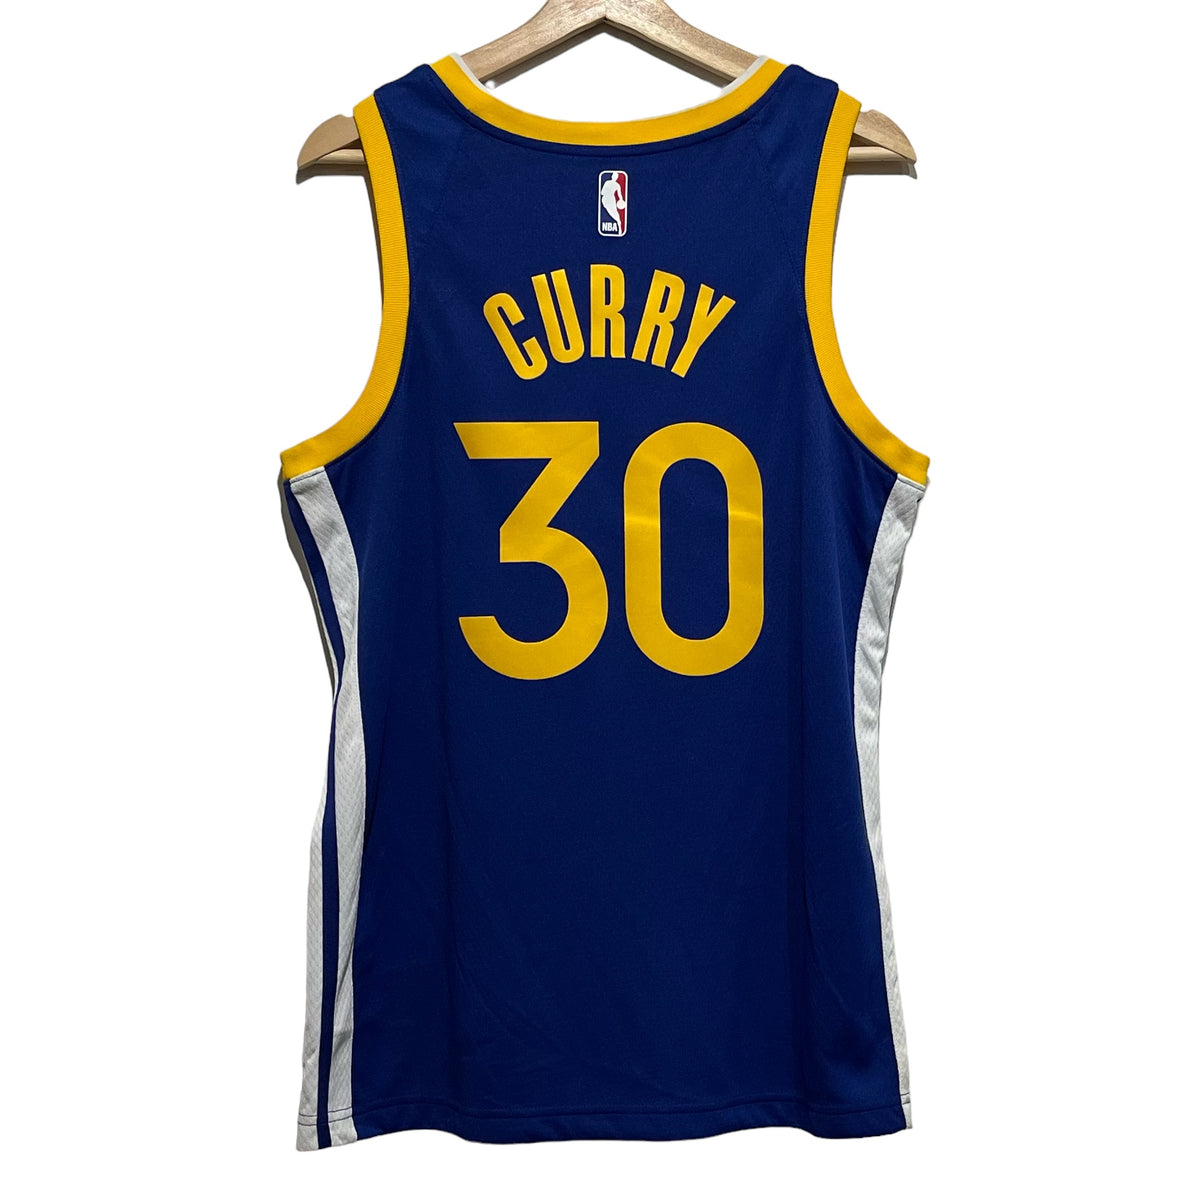 Steph Curry Golden State Warriors Jersey M – Laundry